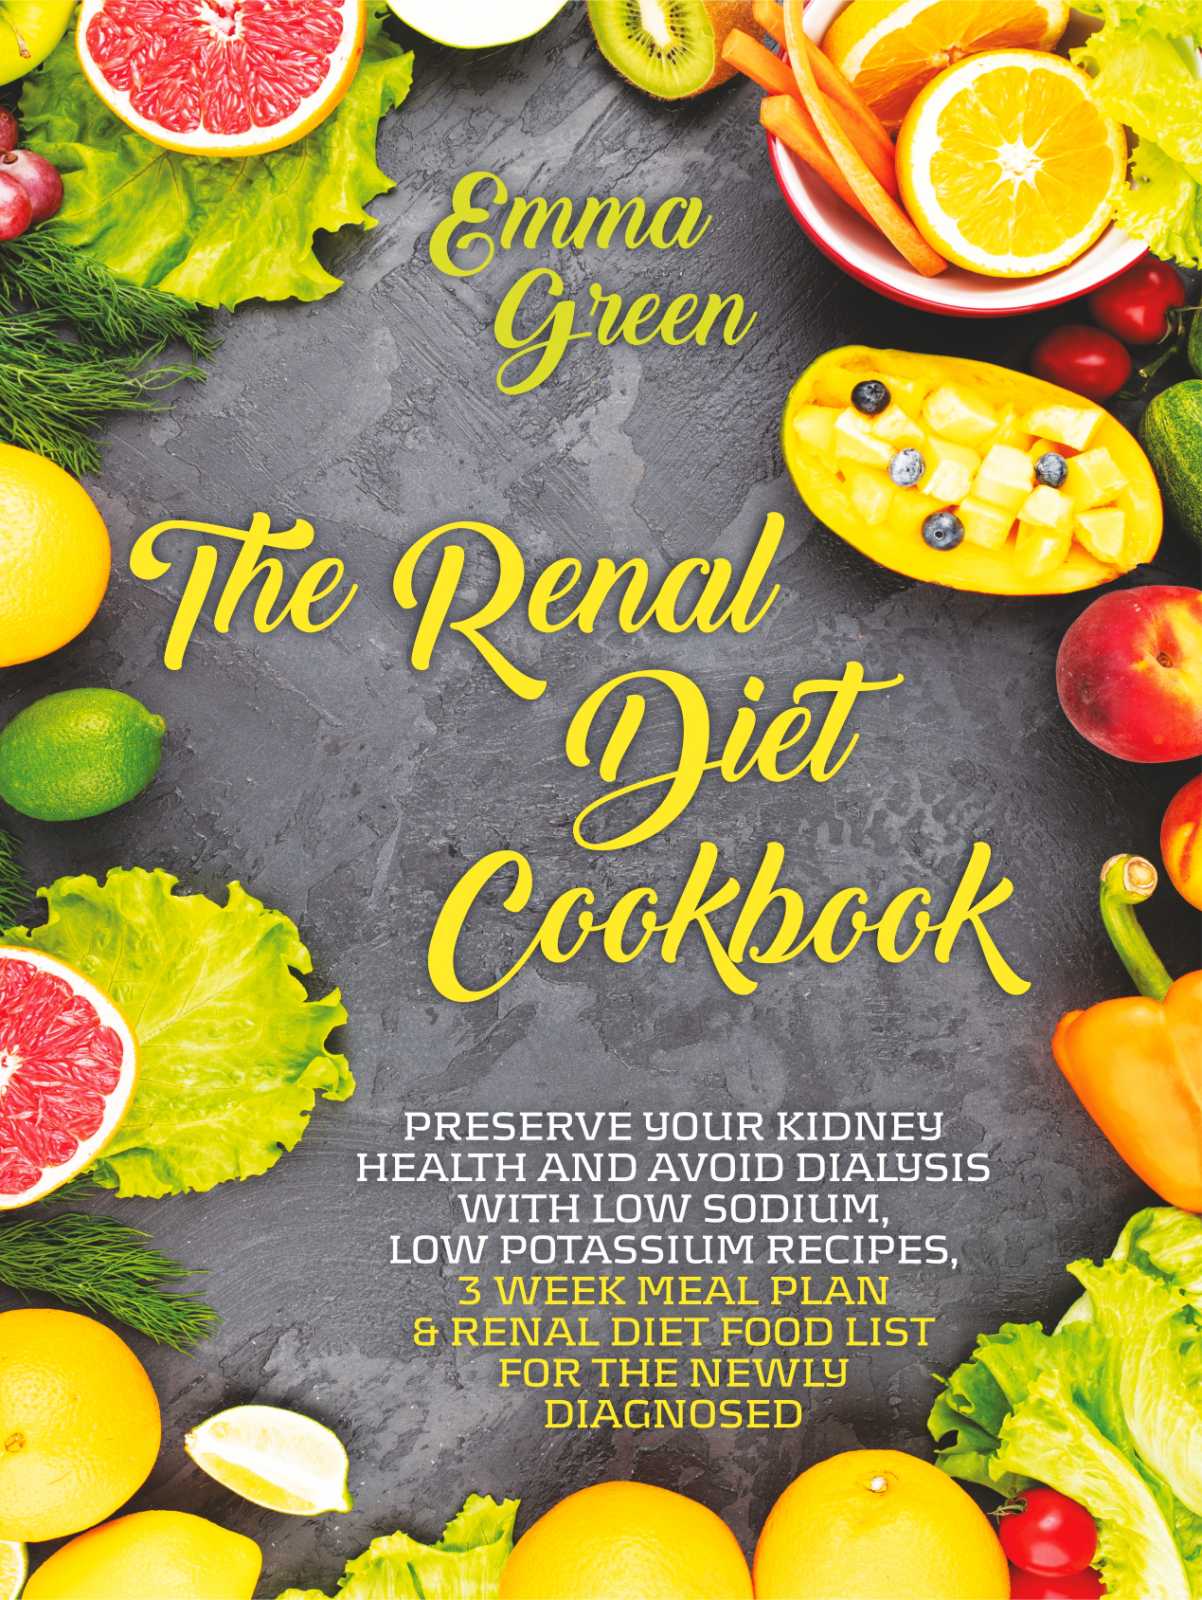 FREE: The Renal Diet Cookbook by Emma Green